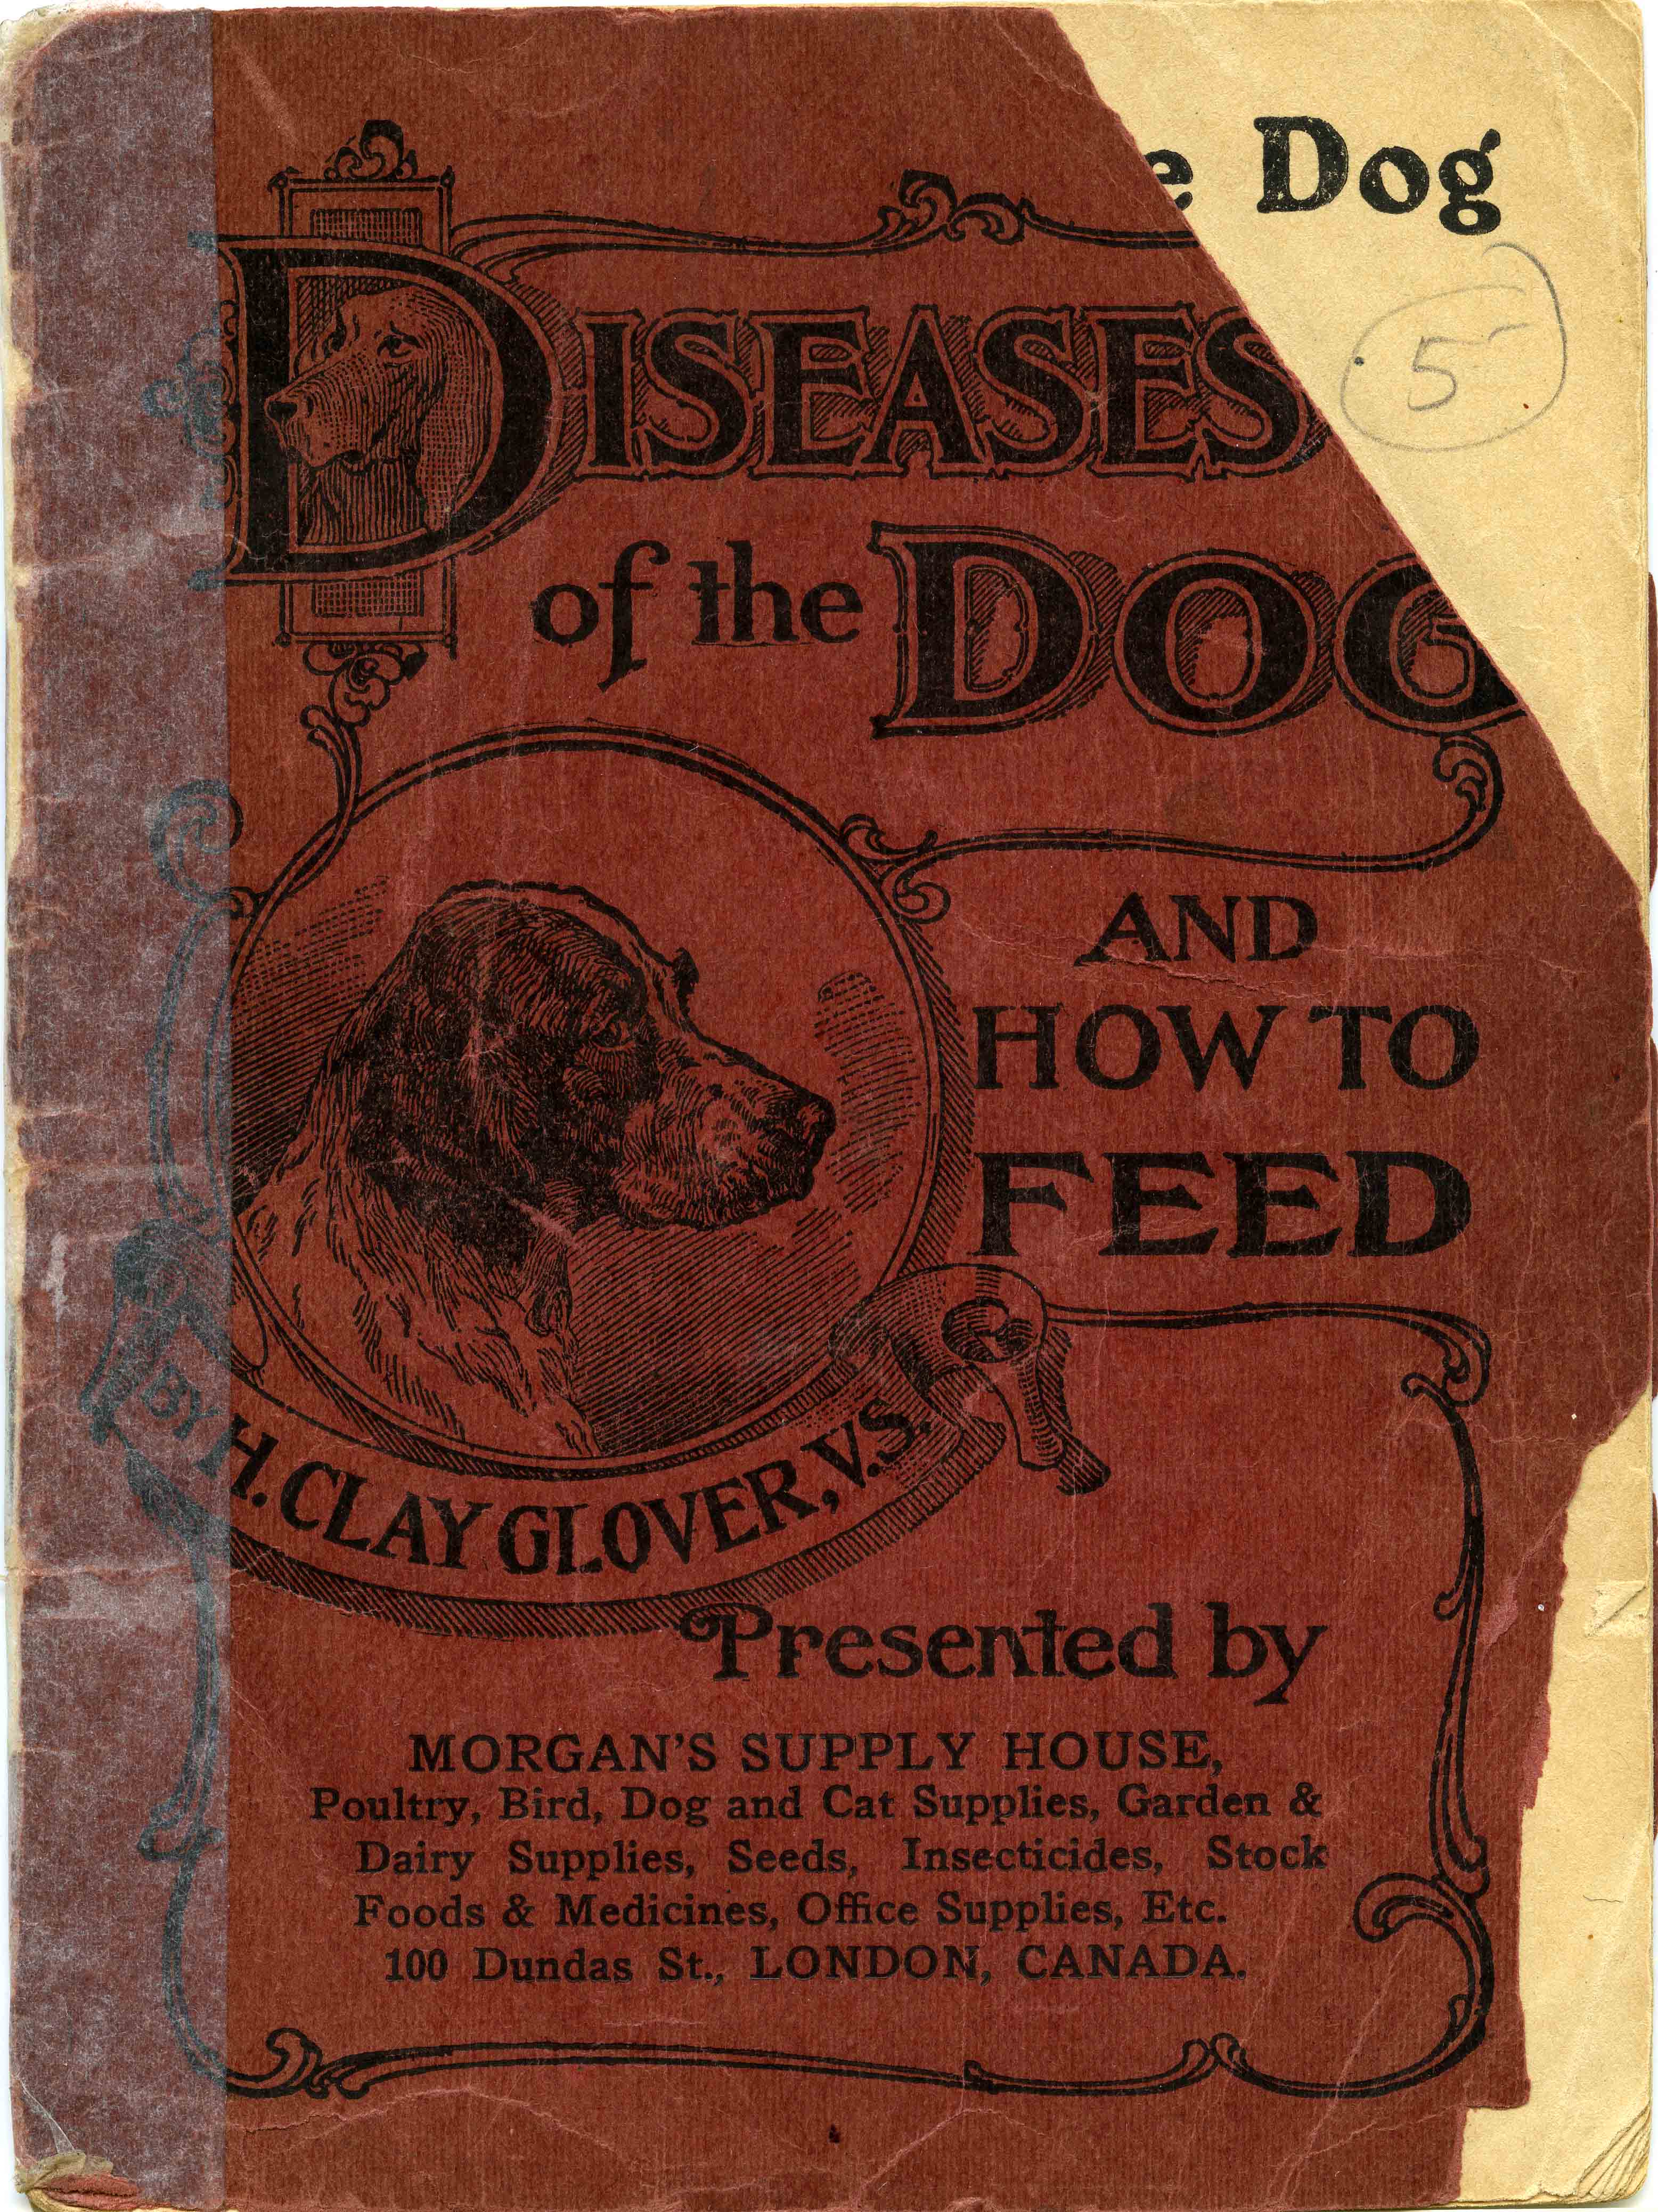 Dr. H. Clay Glover's Diseases of the Dog